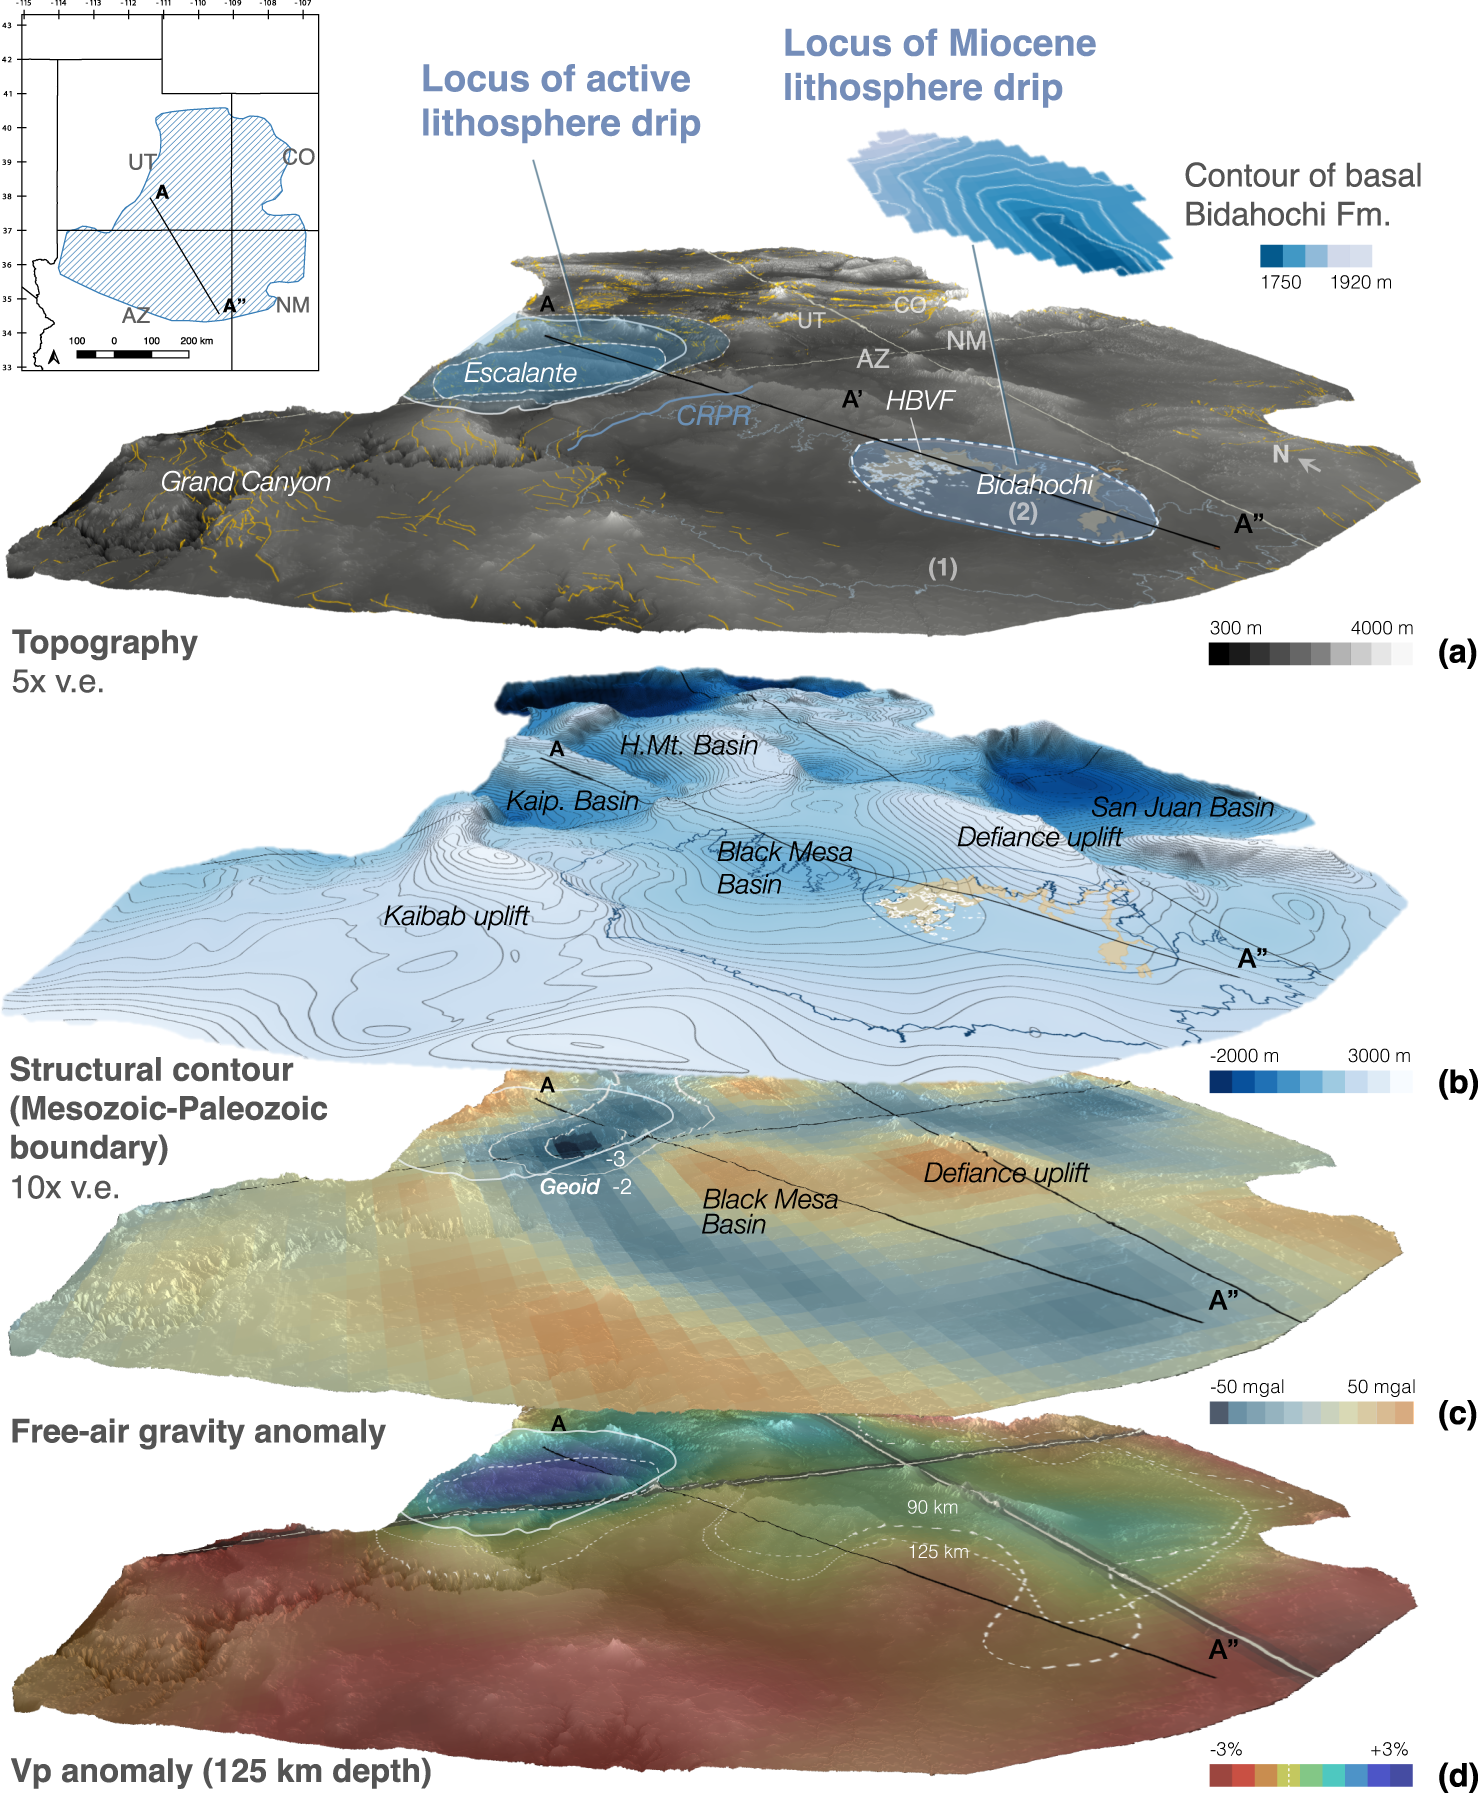 Basin record of a Miocene lithosphere drip beneath the Colorado Plateau |  Nature Communications